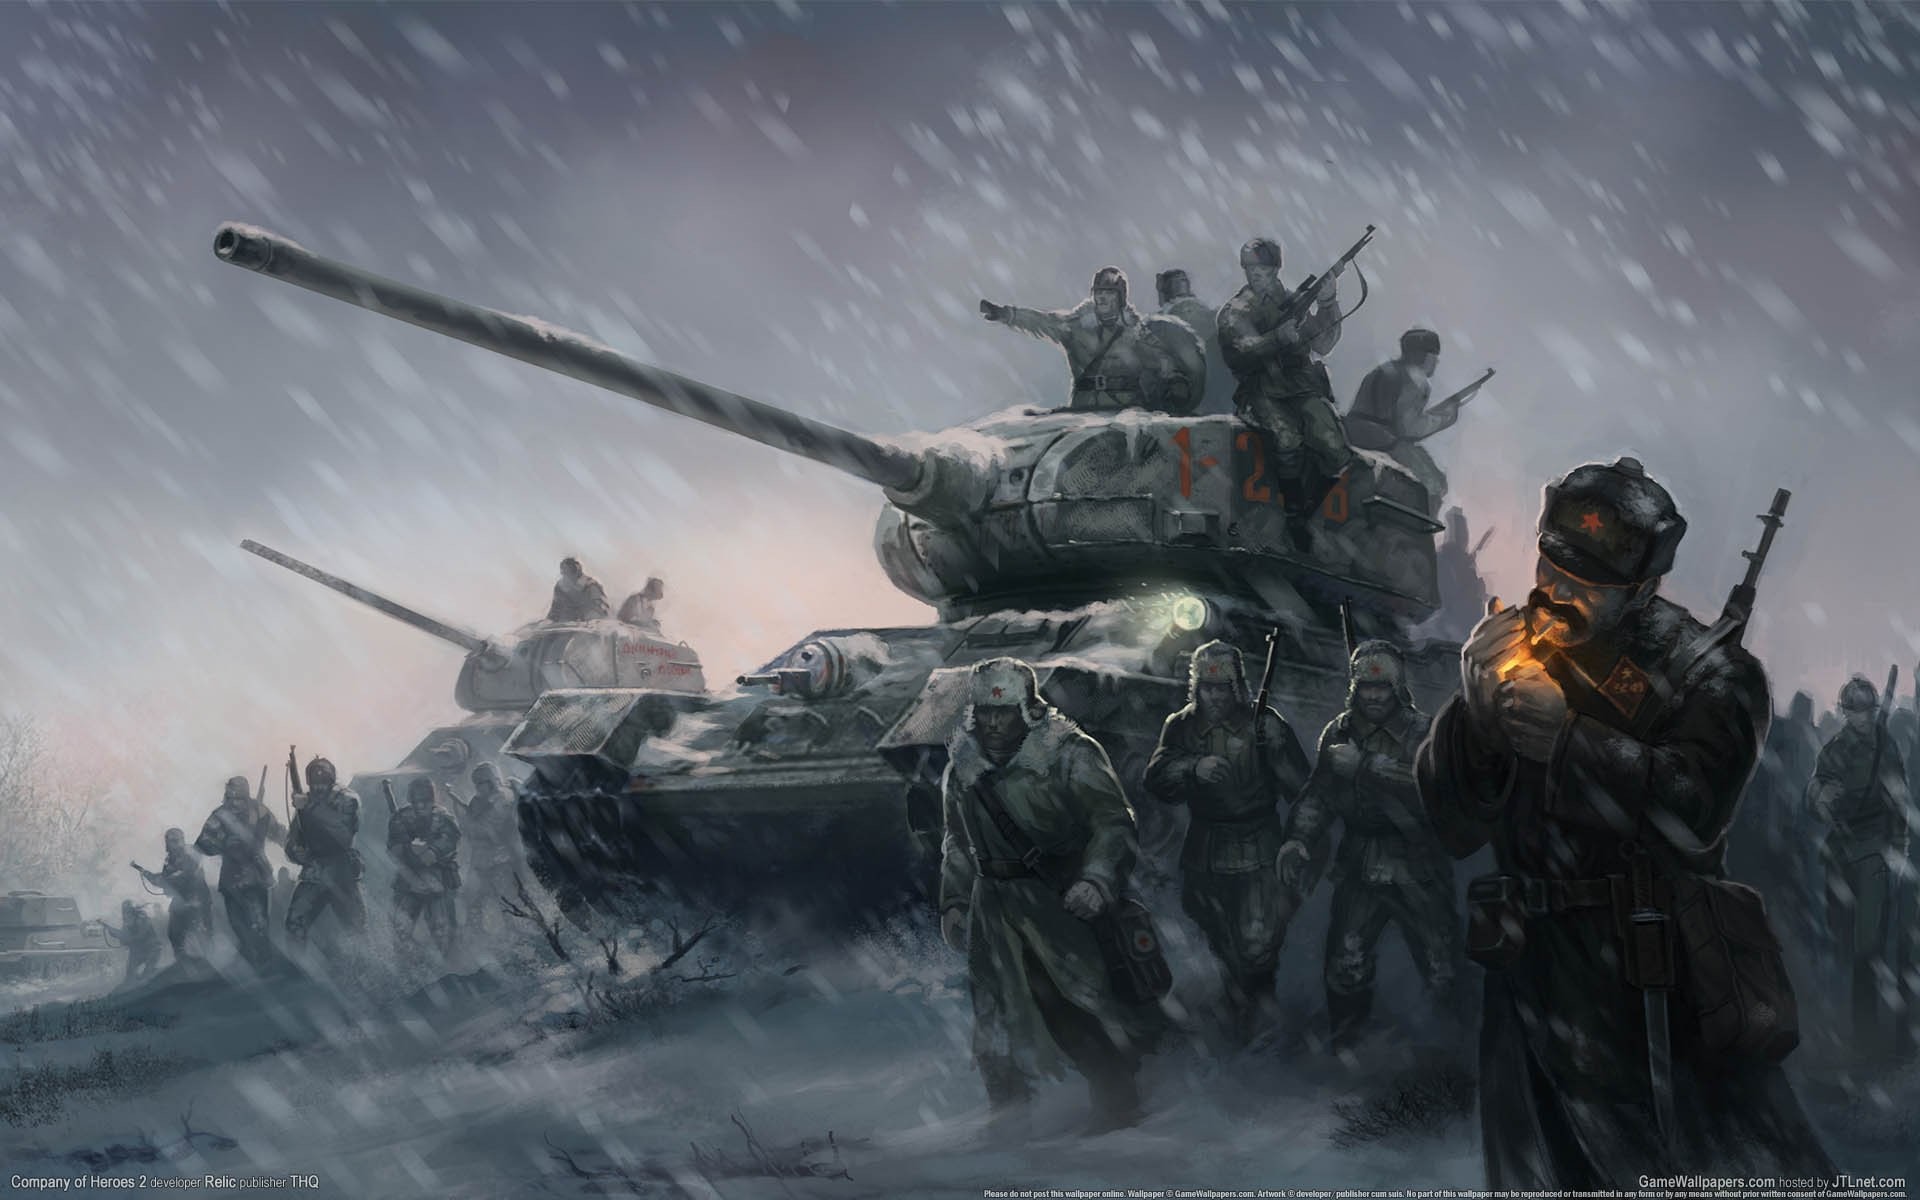 1920x1200 company of heroes 2 game wallpapers world war 2 ww2 tanks soldiers wallpaper  the second world